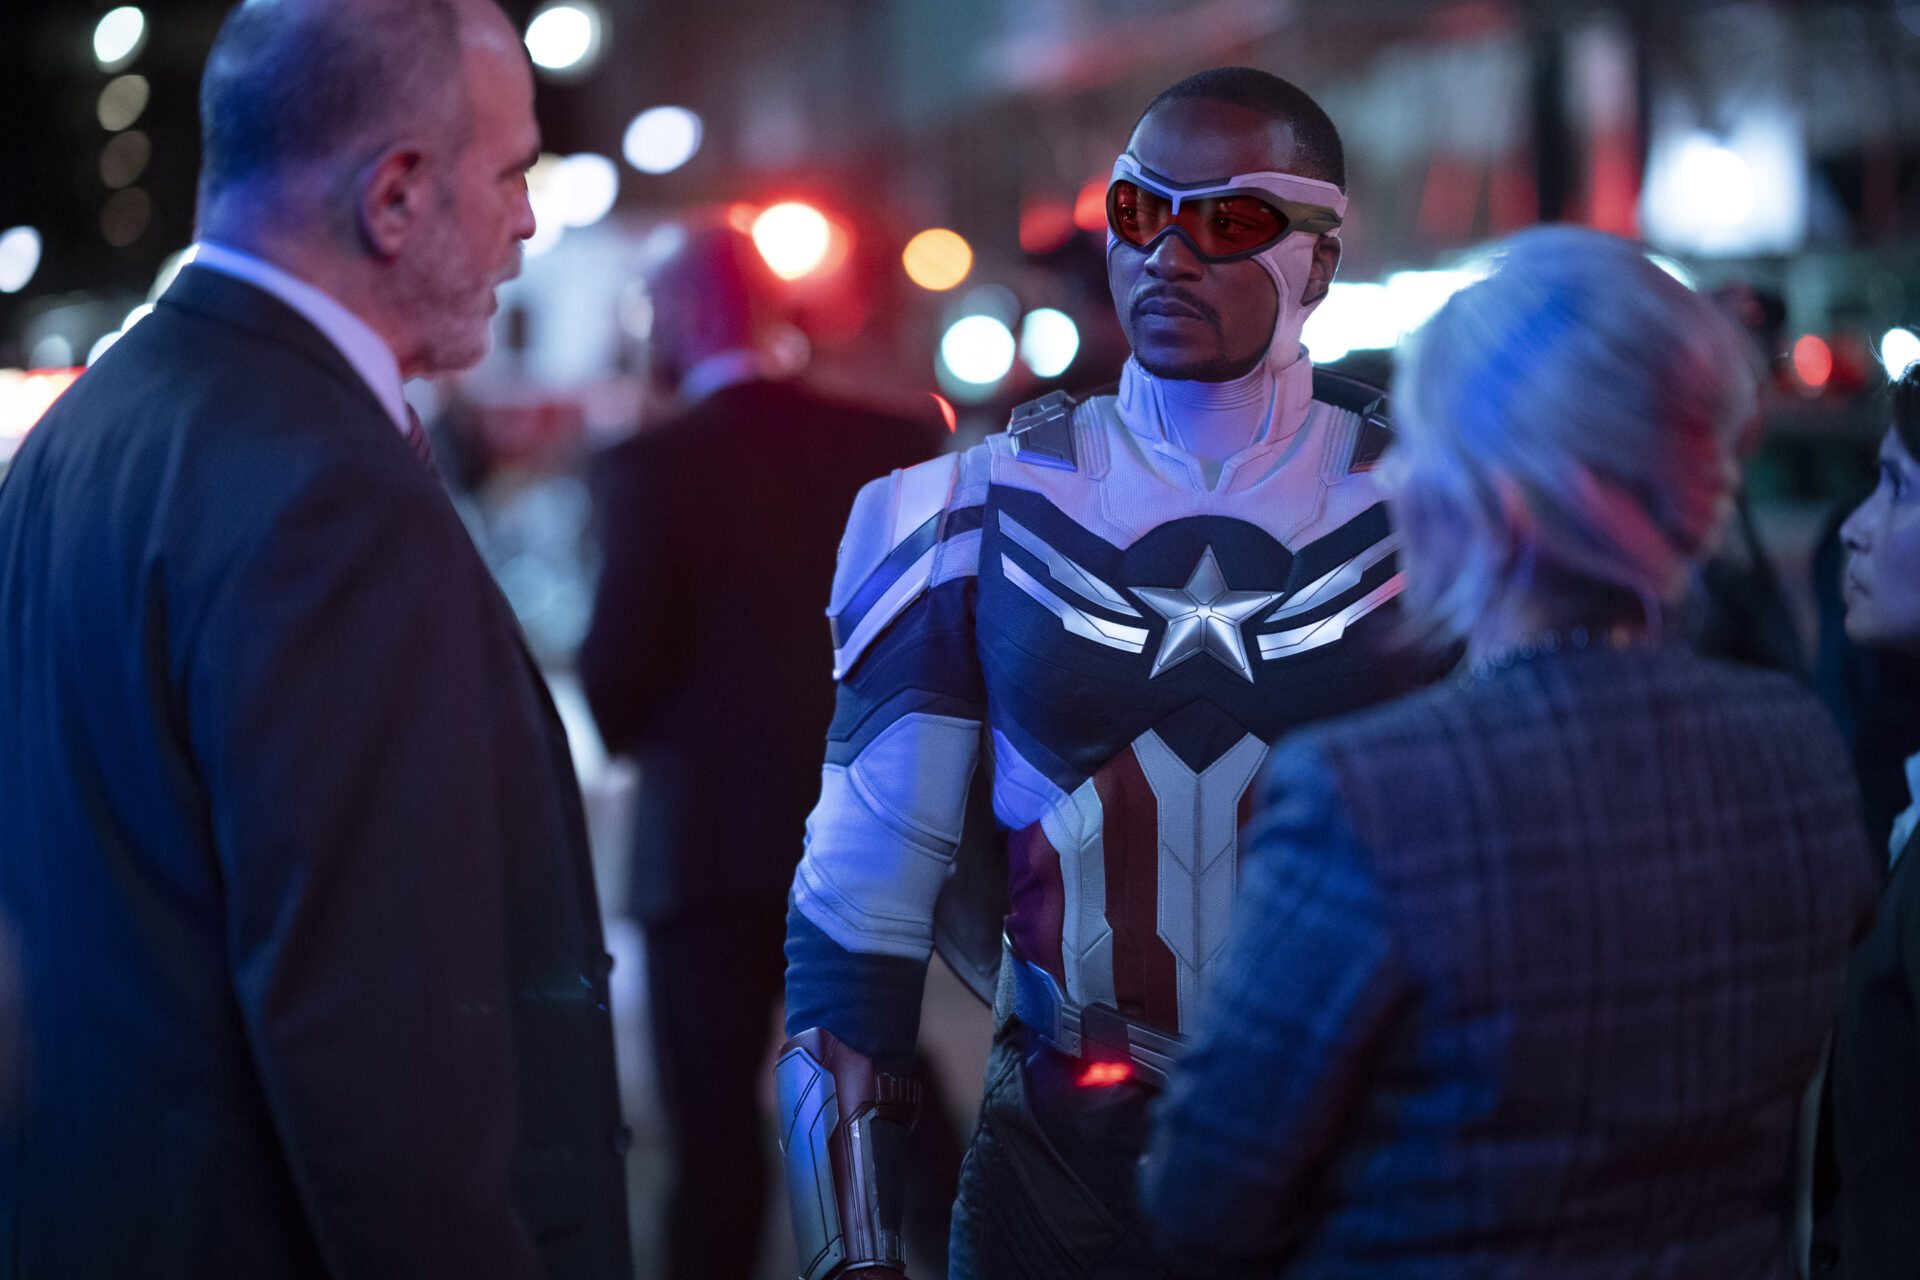 Falcon/Sam Wilson (Anthony Mackie) in Marvel Studios' THE FALCON AND THE WINTER SOLDIER exclusively on Disney+. Photo by Eli Adé. ©Marvel Studios 2021. All Rights Reserved.